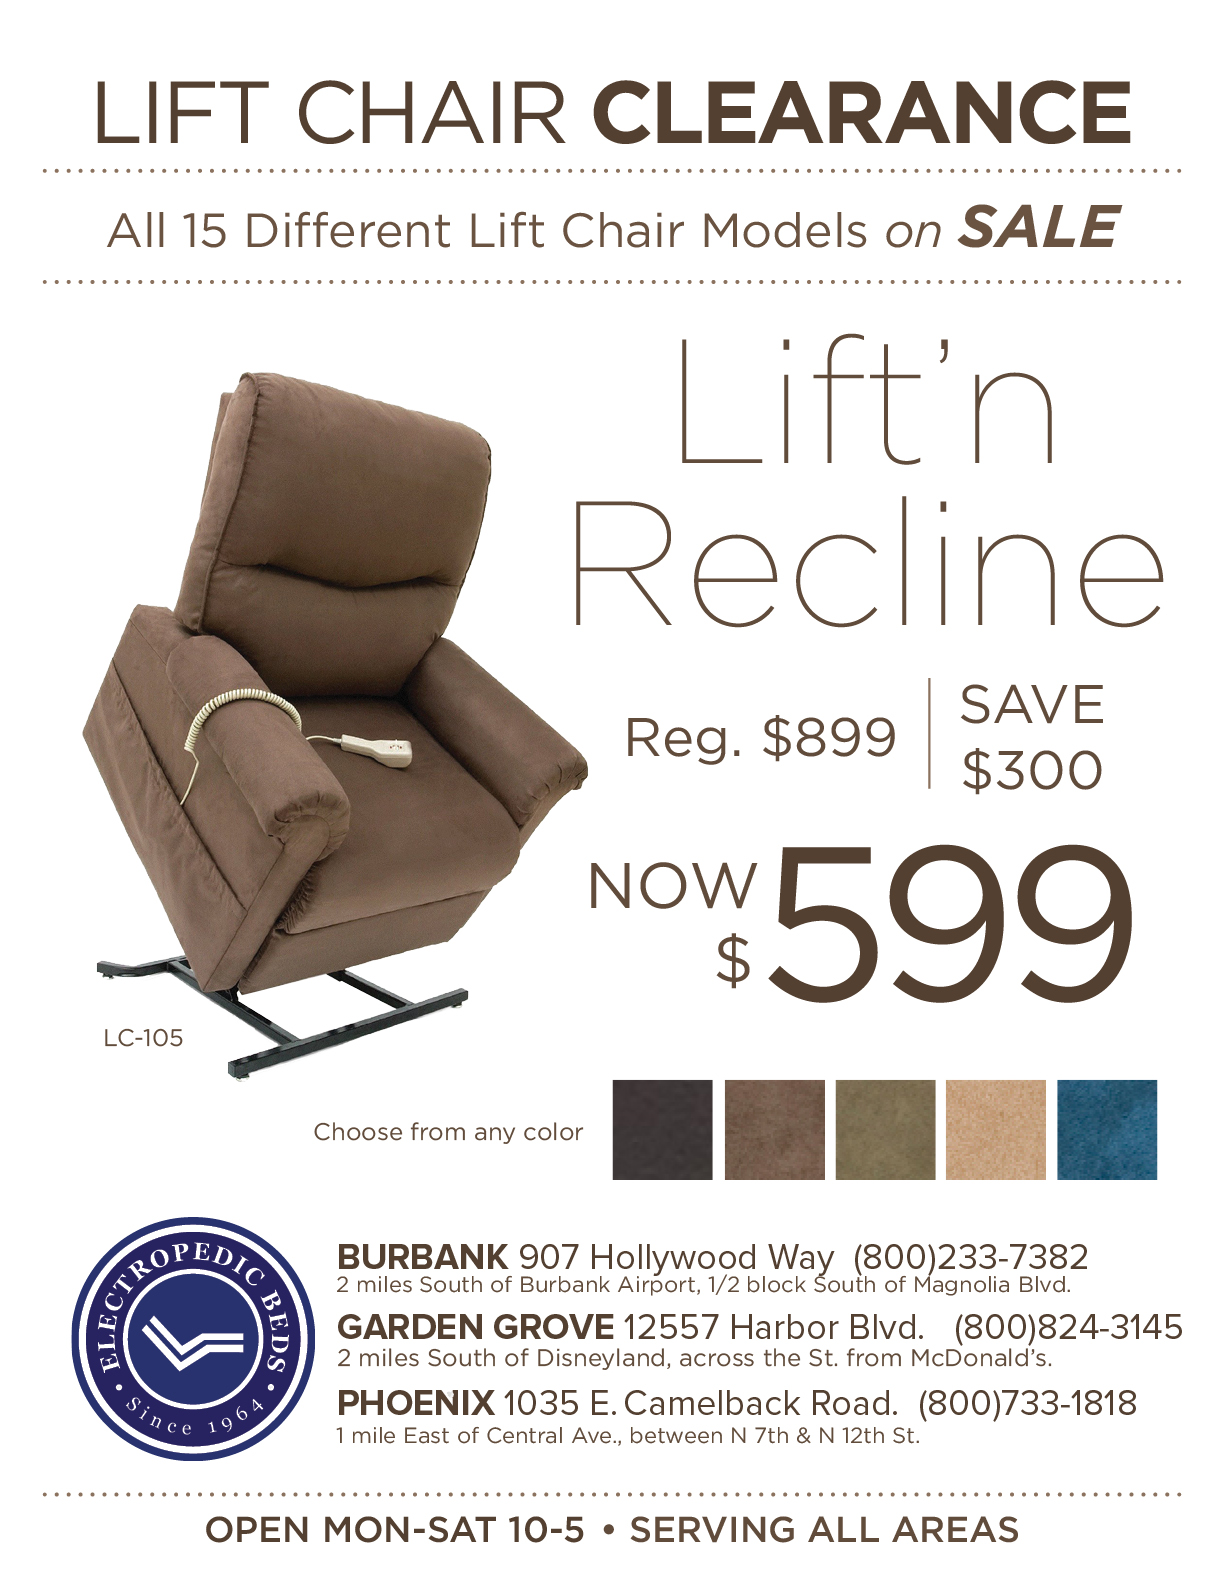 Los angeles best selection of lift chairs: LA Golden liftchair reclining, LA Pride recliners and Medical Lift-Chairs